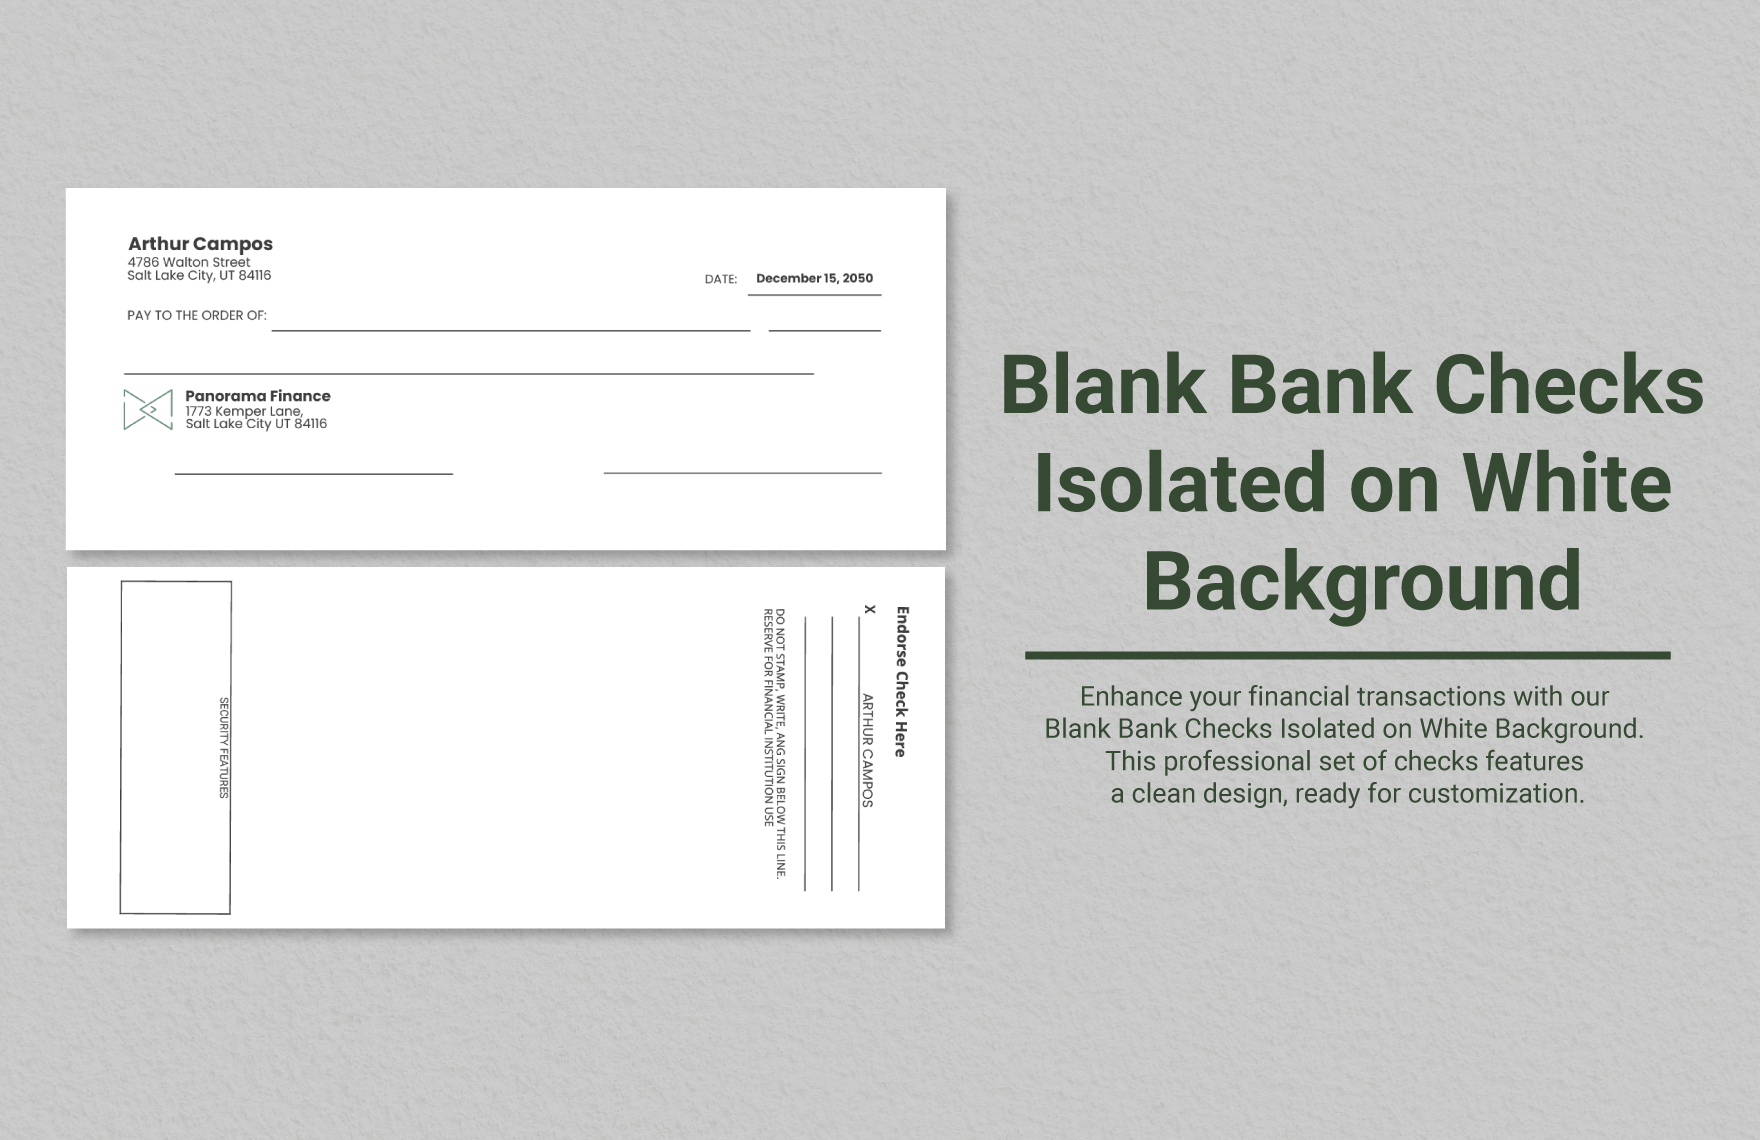 Blank Bank Checks Isolated on White Background in Word, Illustrator, PSD